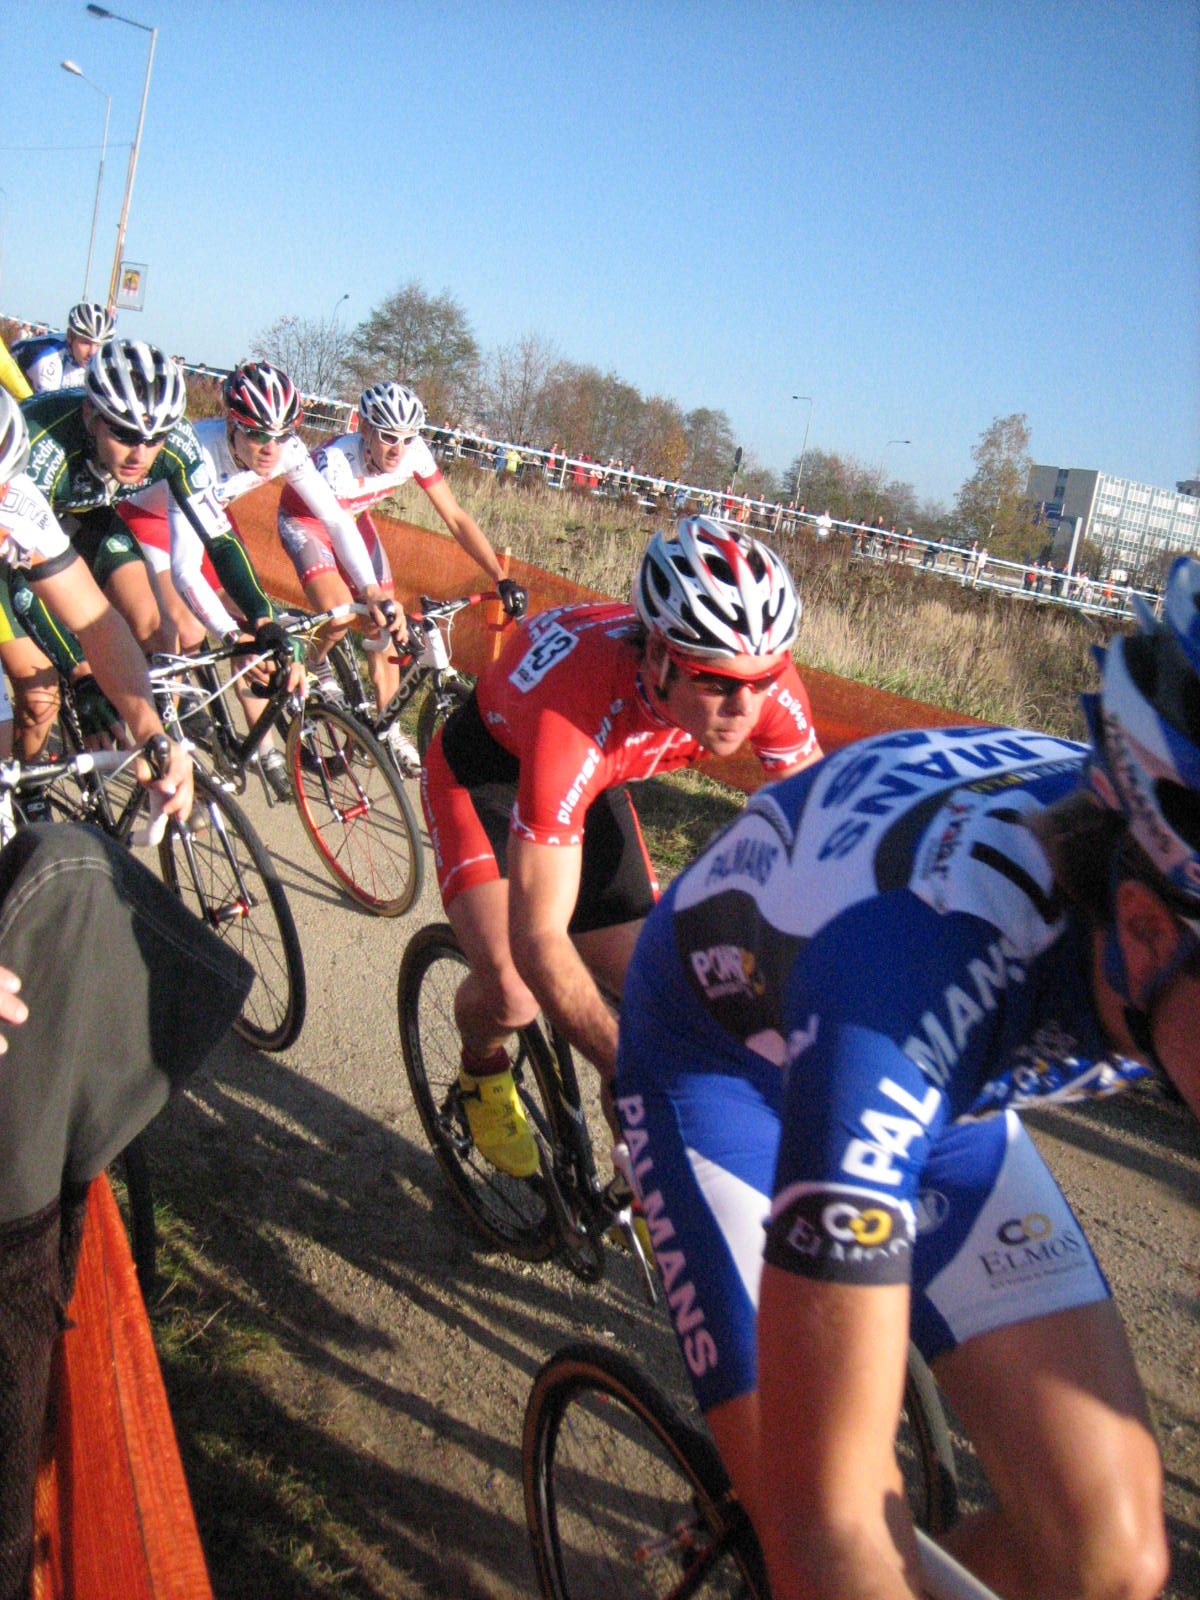 jonathan on niels albert wheel onto dirt first lap - rob peeters behind as is christian heule on right with swiss natl jersey